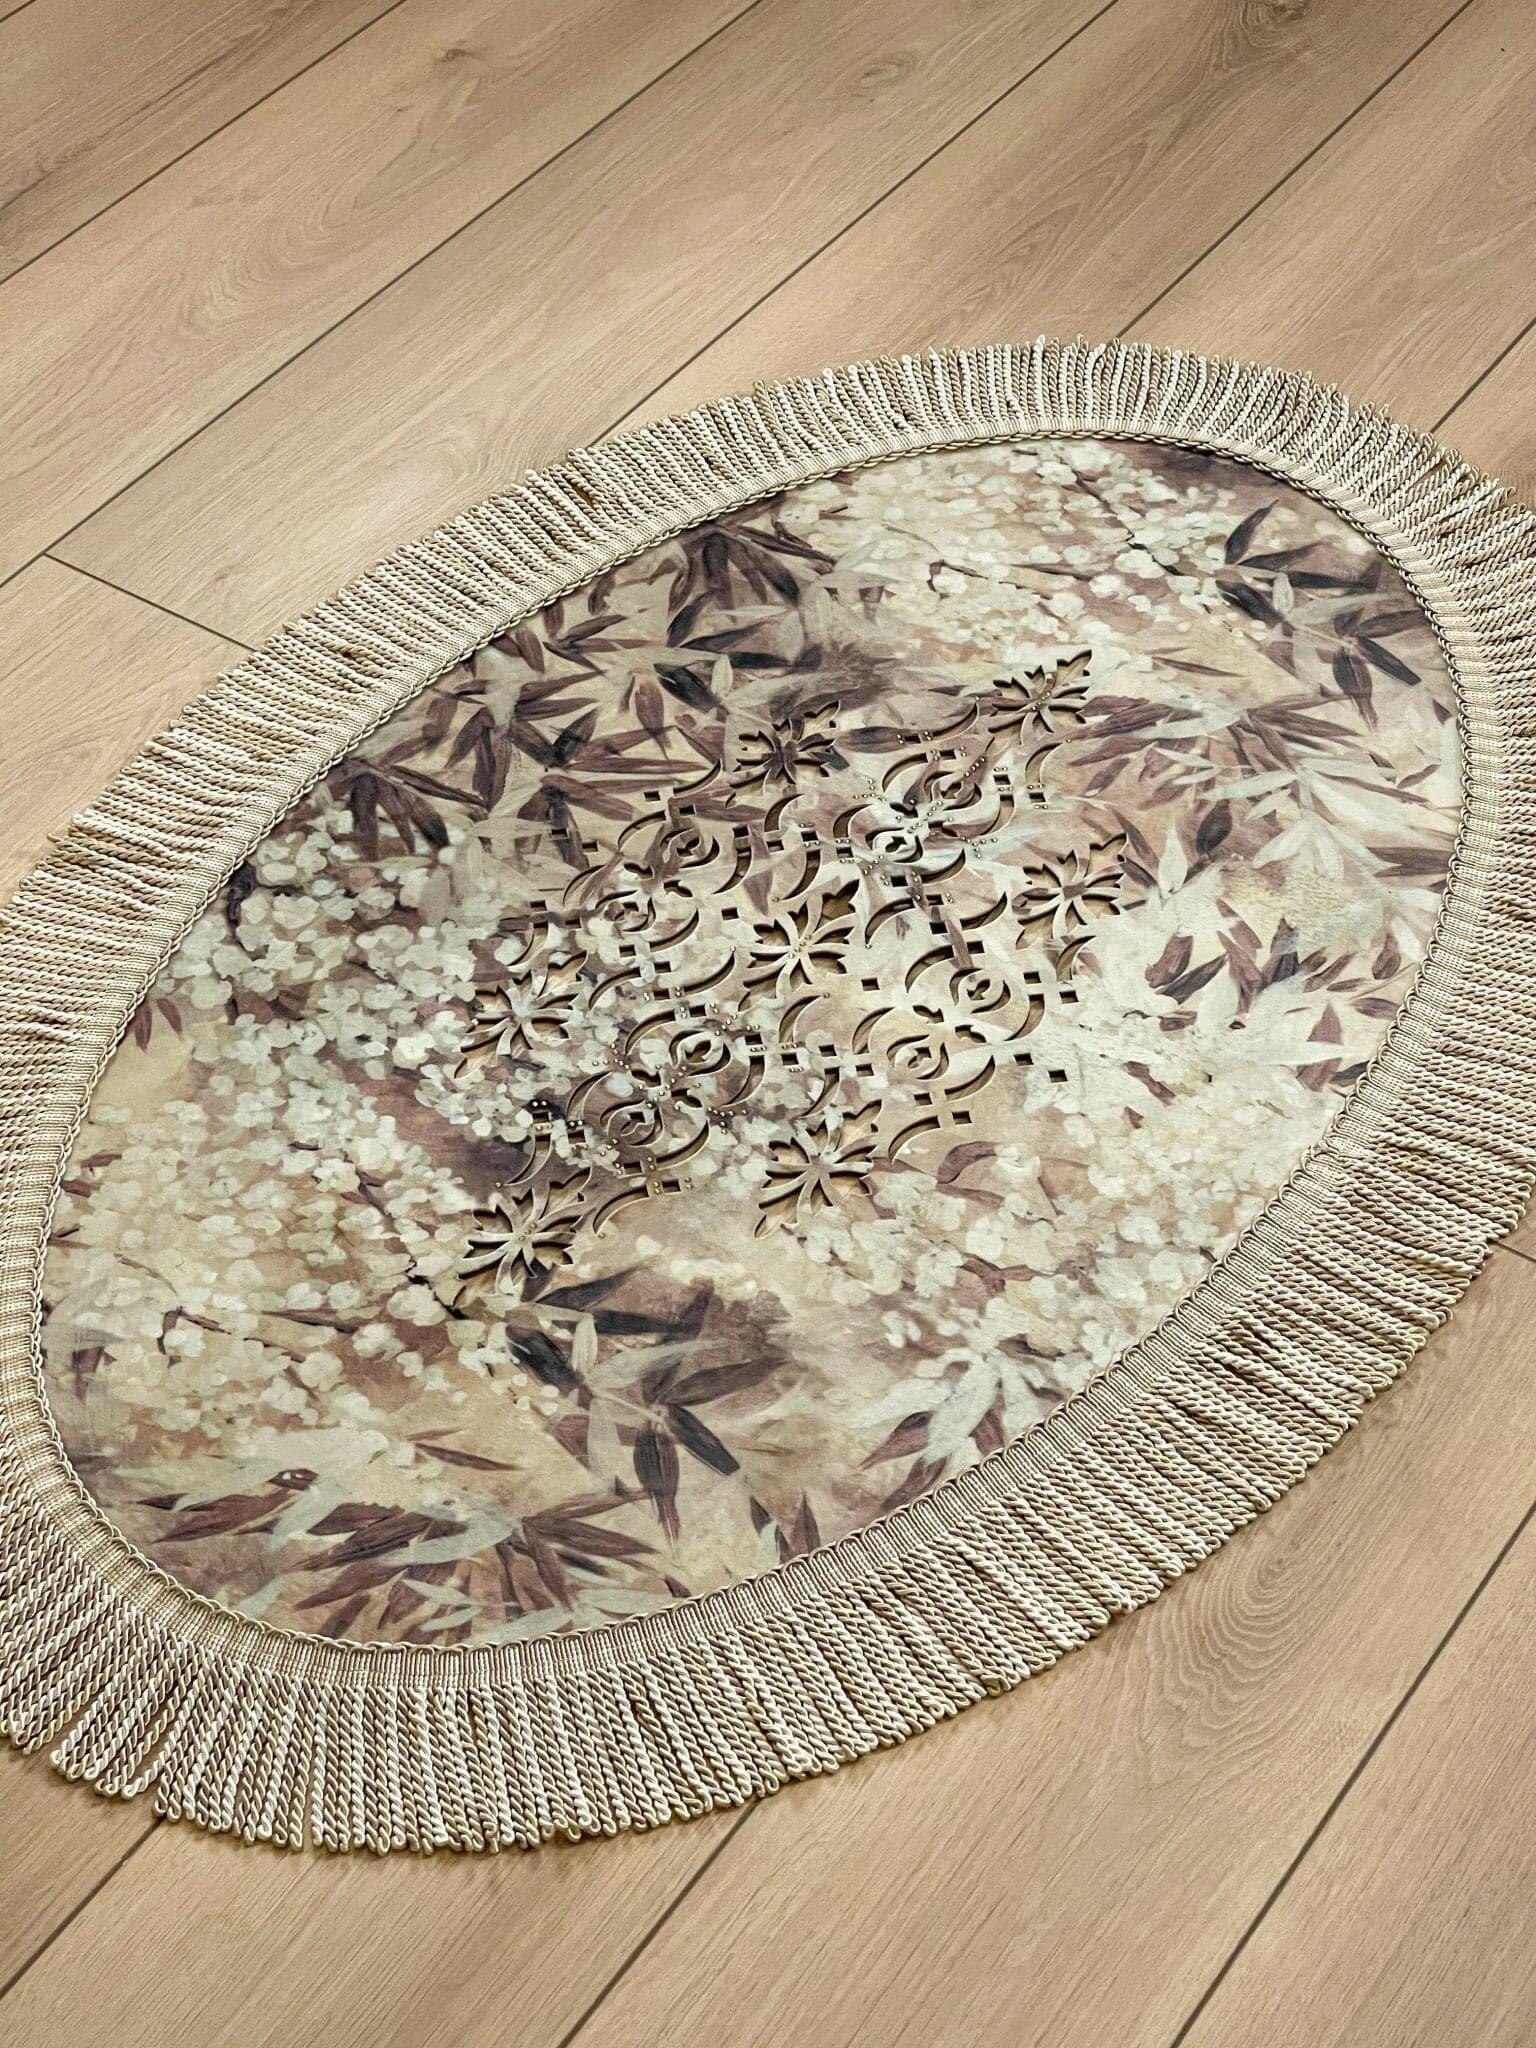 Palma Oval Coffee Brown Velvet Bathroom & Area Lounge Rug, Cut Through Floral Inspired Carpet with Tassels, Turkish Non-Slip Handmade Mat by Creative Home,RUG-PALMA-Bro-4060,RUG-PALMA-Bro-60100,RUG-PALMA-Bro-70120,RUG-PALMA-Bro-90150,RUG-PALMA-Bro-121182,RUG-PALMA-Bro-152243